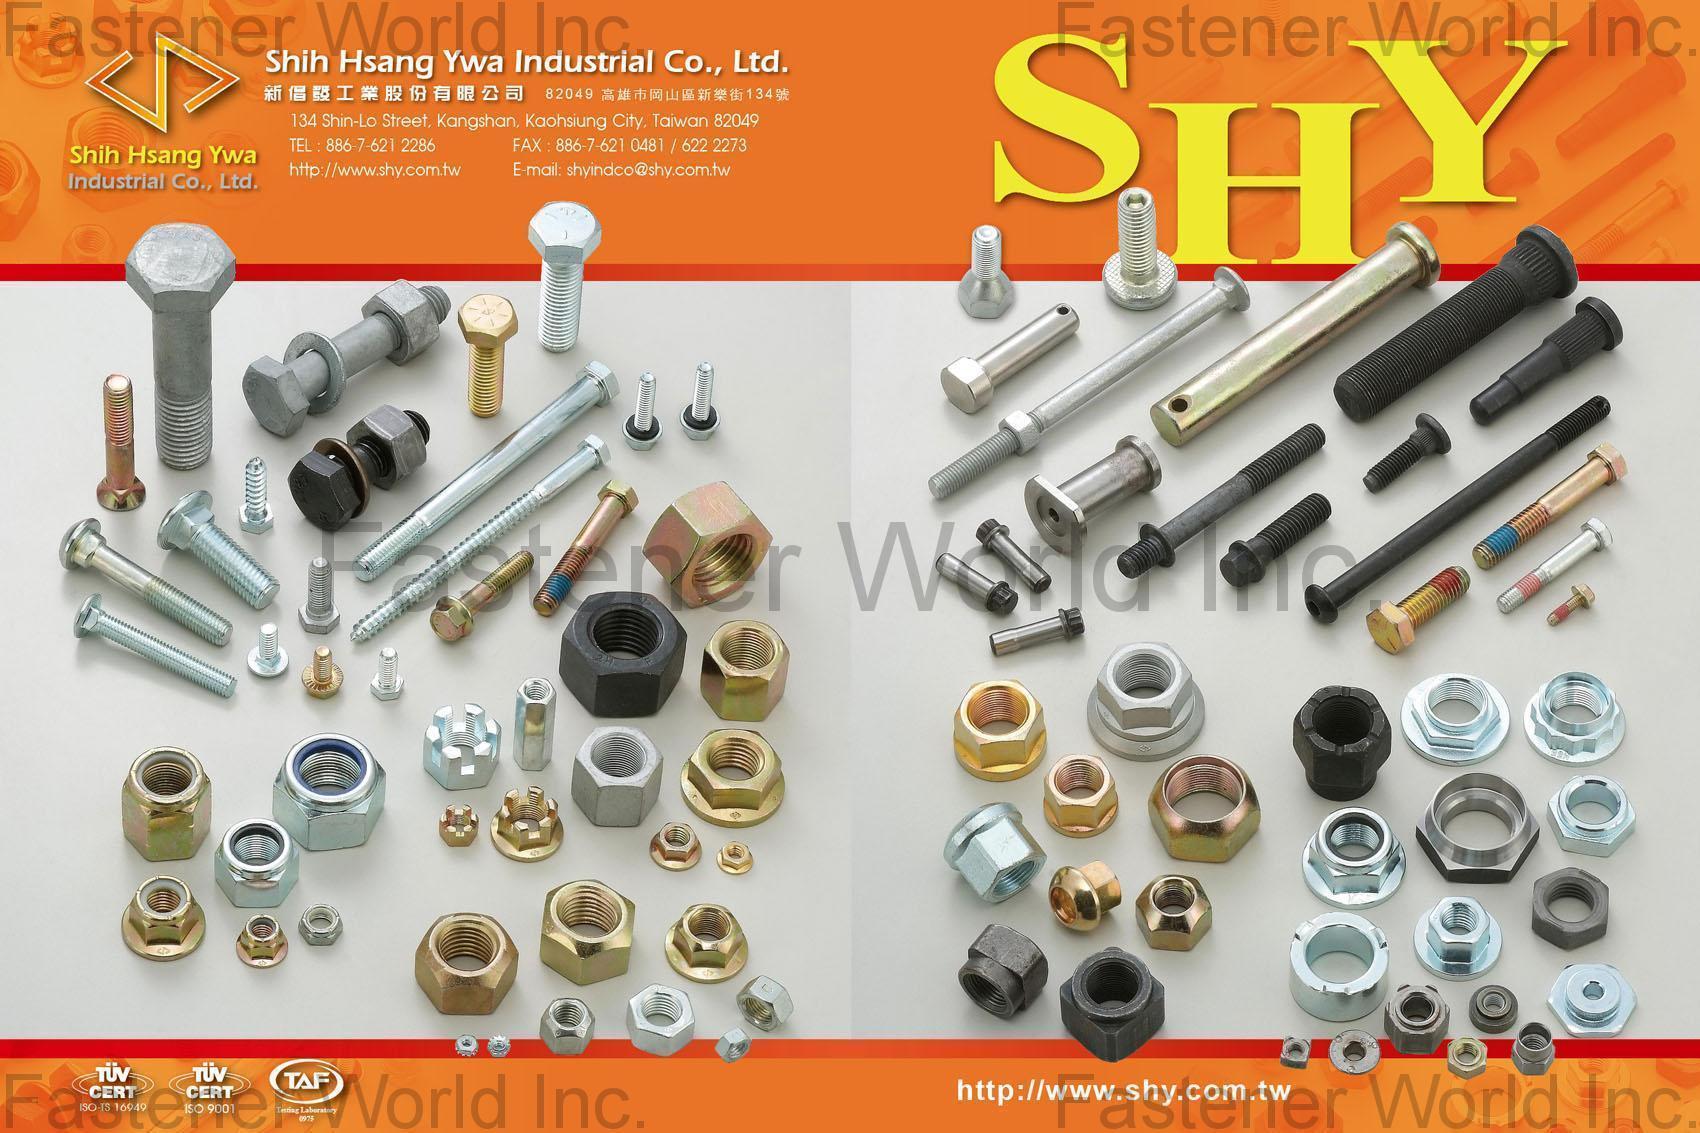 SHIH HSANG YWA INDUSTRIAL CO., LTD.  , Nylon & Nylon Flange Nuts, Hot Forming Products, Flange , All Kinds Of Nuts